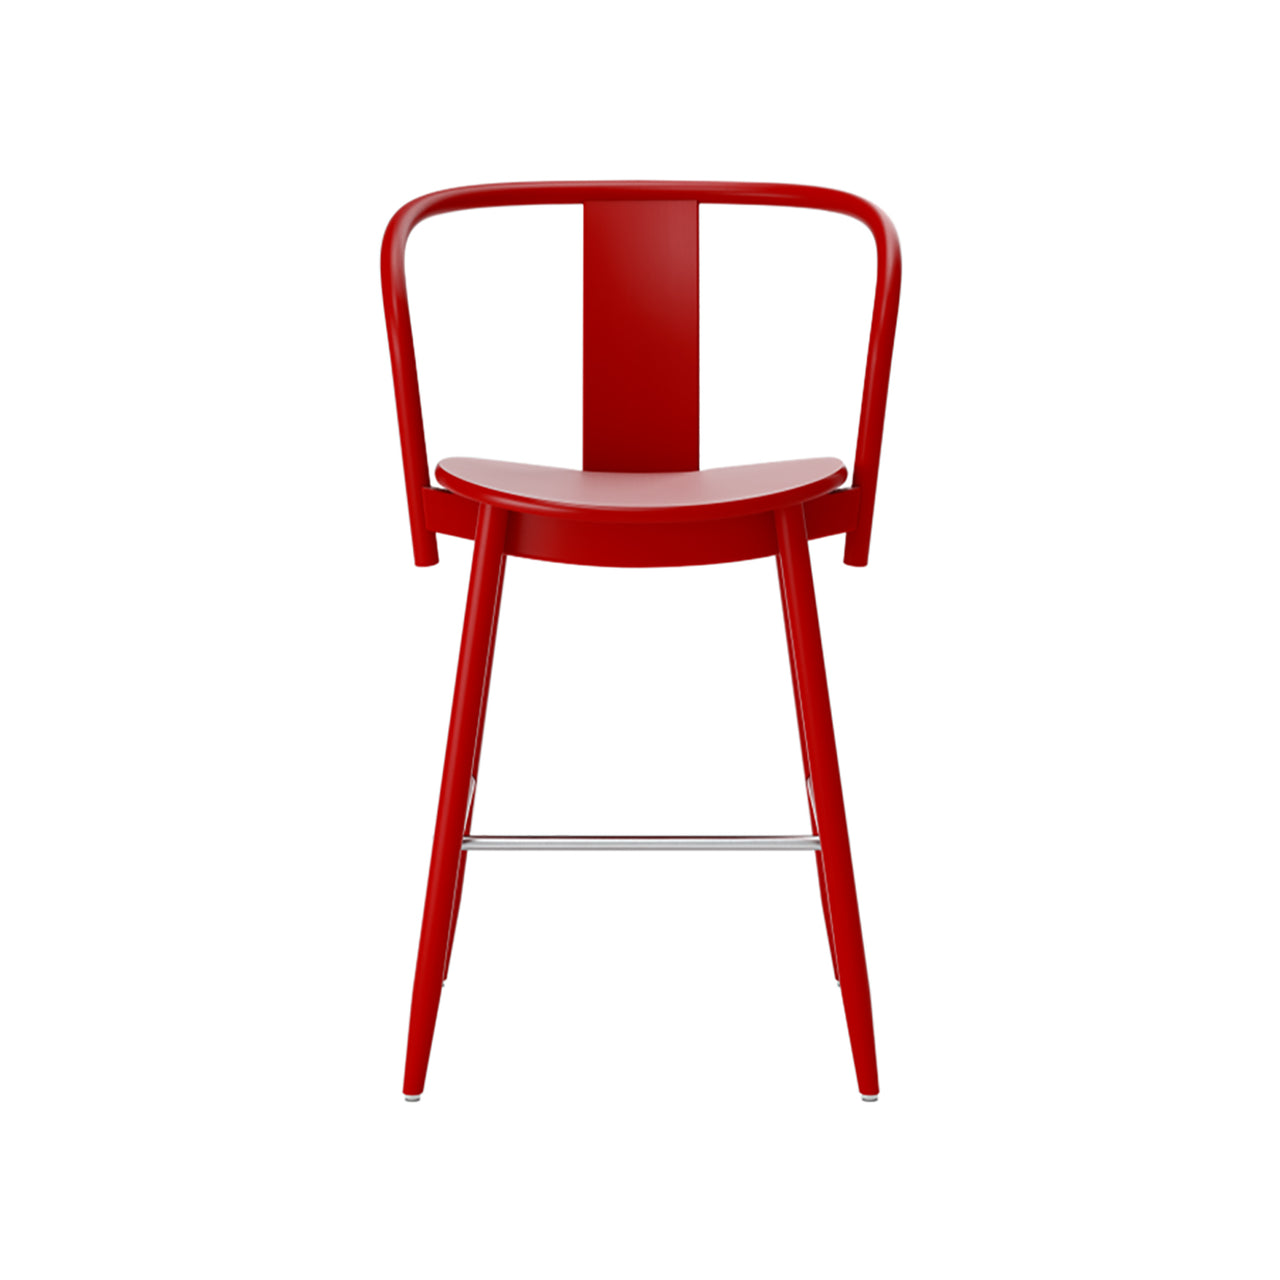 Icha Bar + Counter Chair: Counter + Red Lacquered Beech